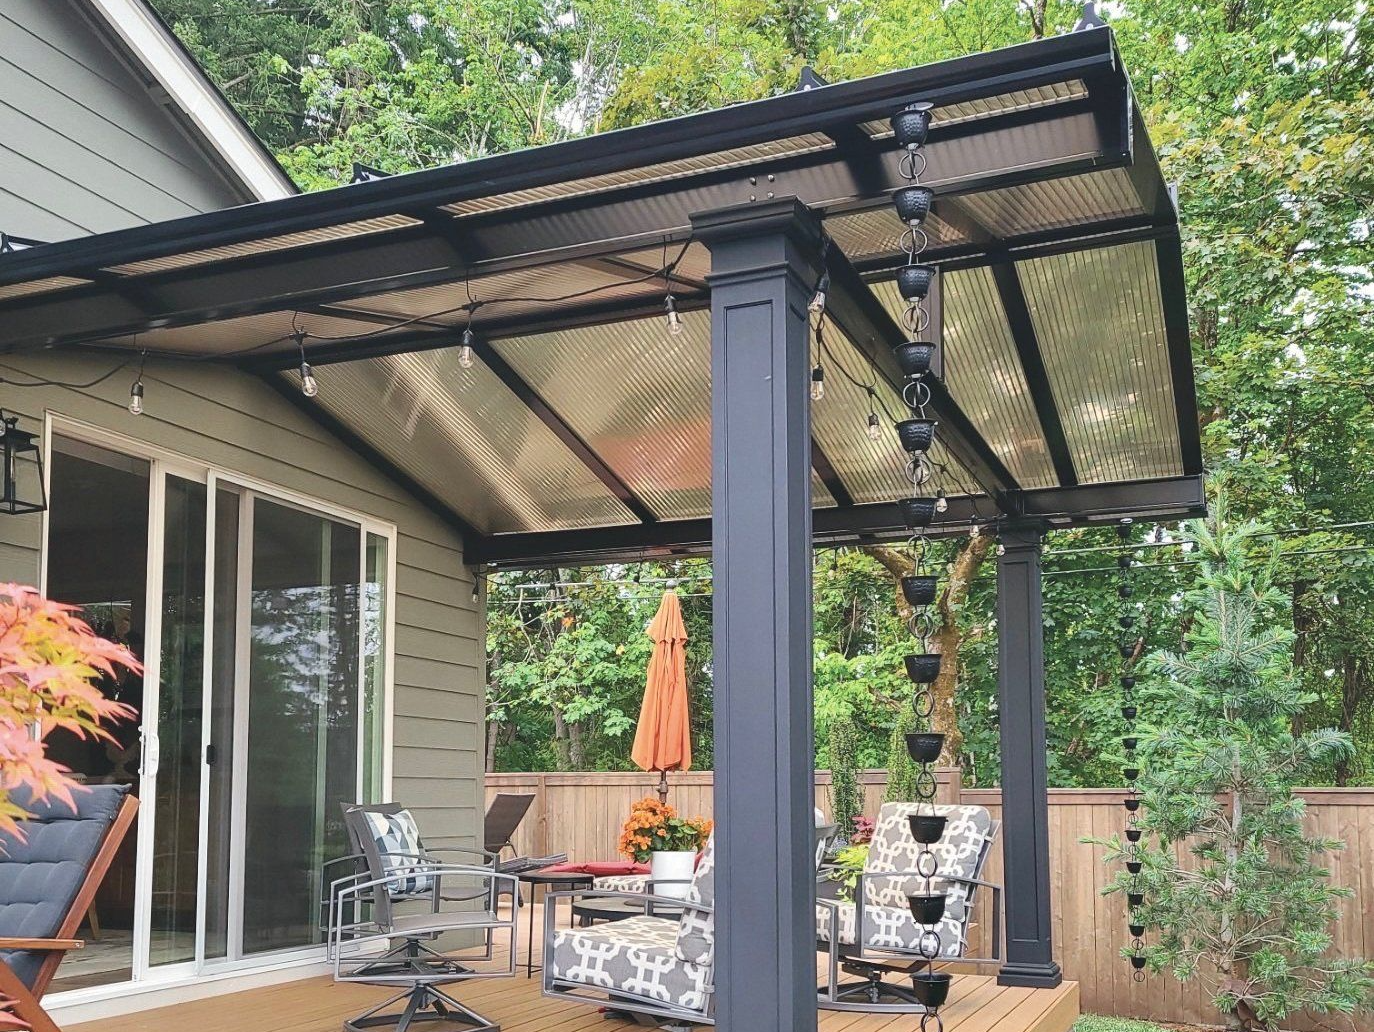 Patio Covers in Troutdale Oregon - Gable Roof with ACRYLITE Acrylic